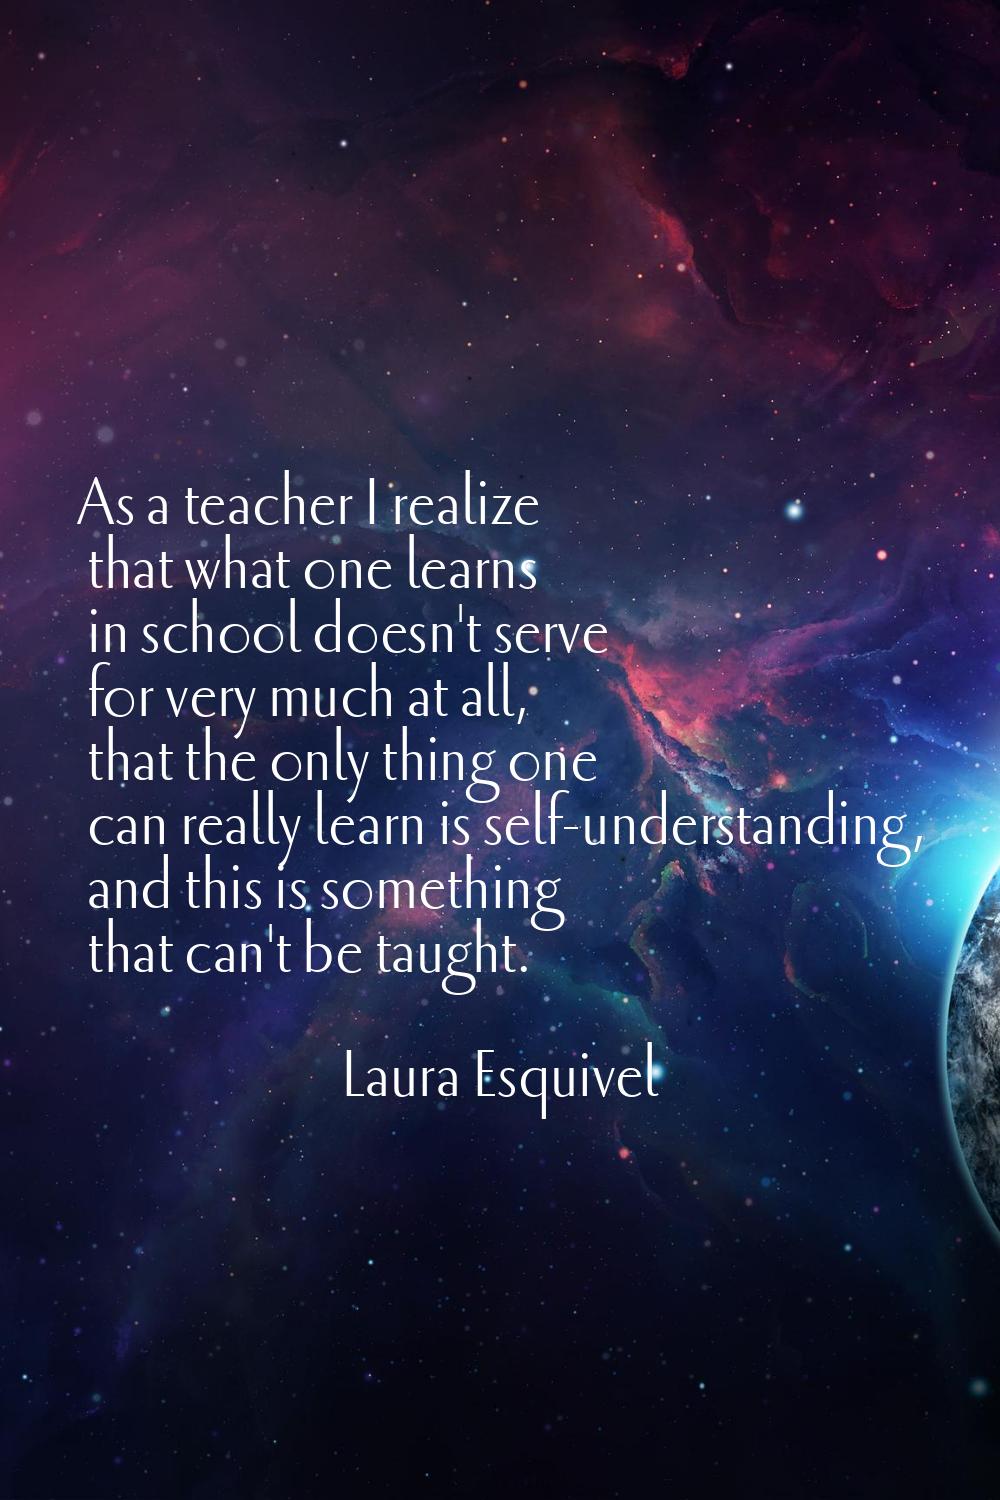 As a teacher I realize that what one learns in school doesn't serve for very much at all, that the 